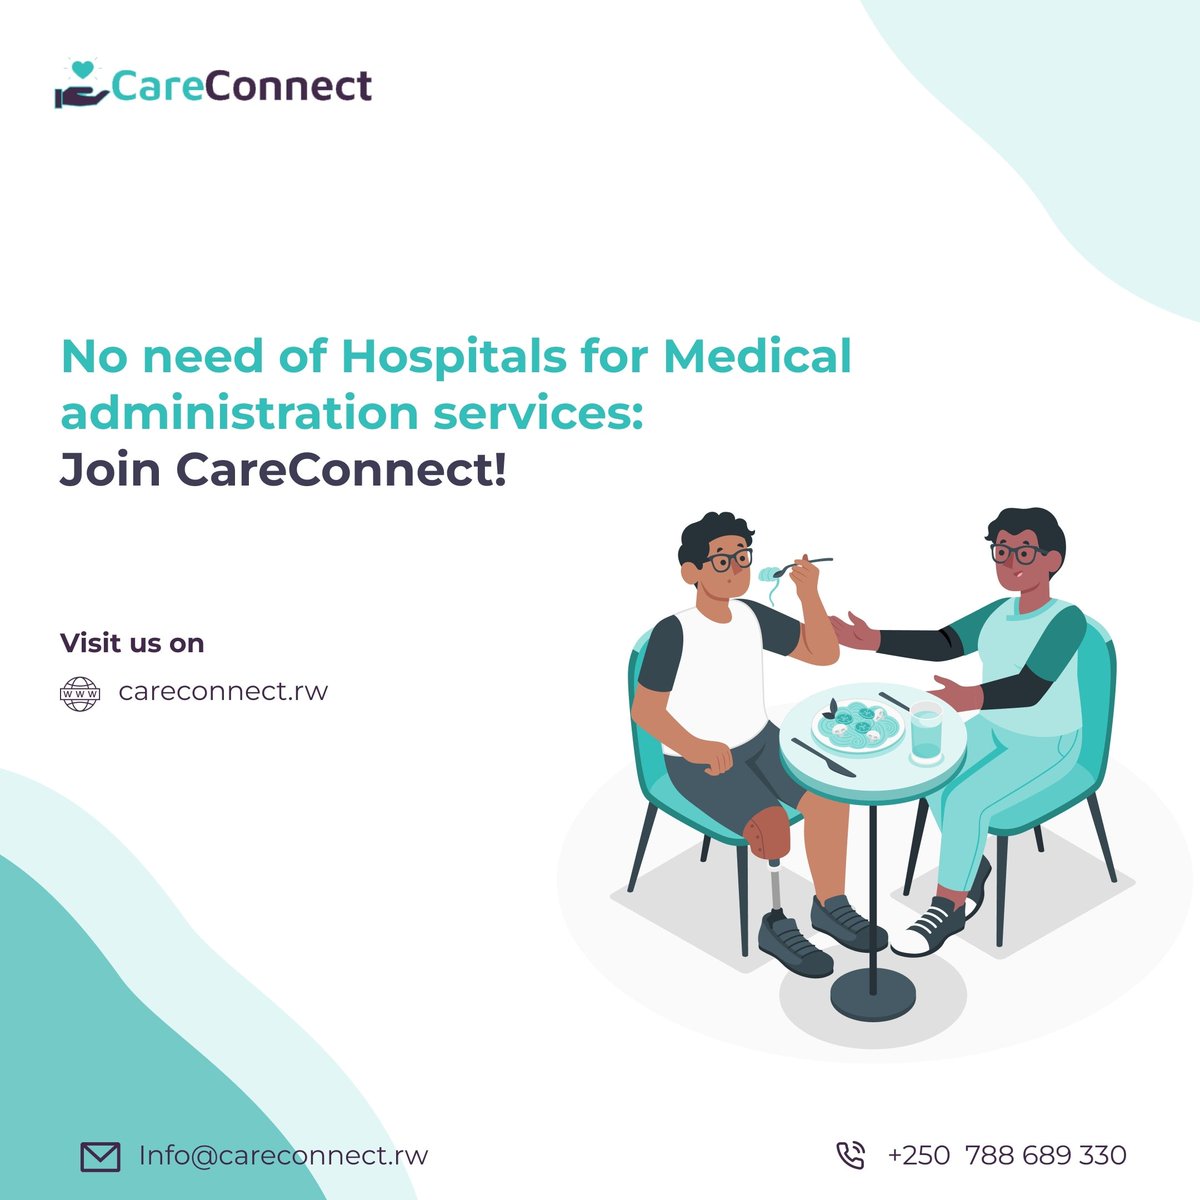 Skip the hospital trips with CareConnect! Our healthCare-givers professionals come to you, ensuring safe and accurate medication administration. Join #CareConnect now for healthcare giving services. #HealthcareAtHome